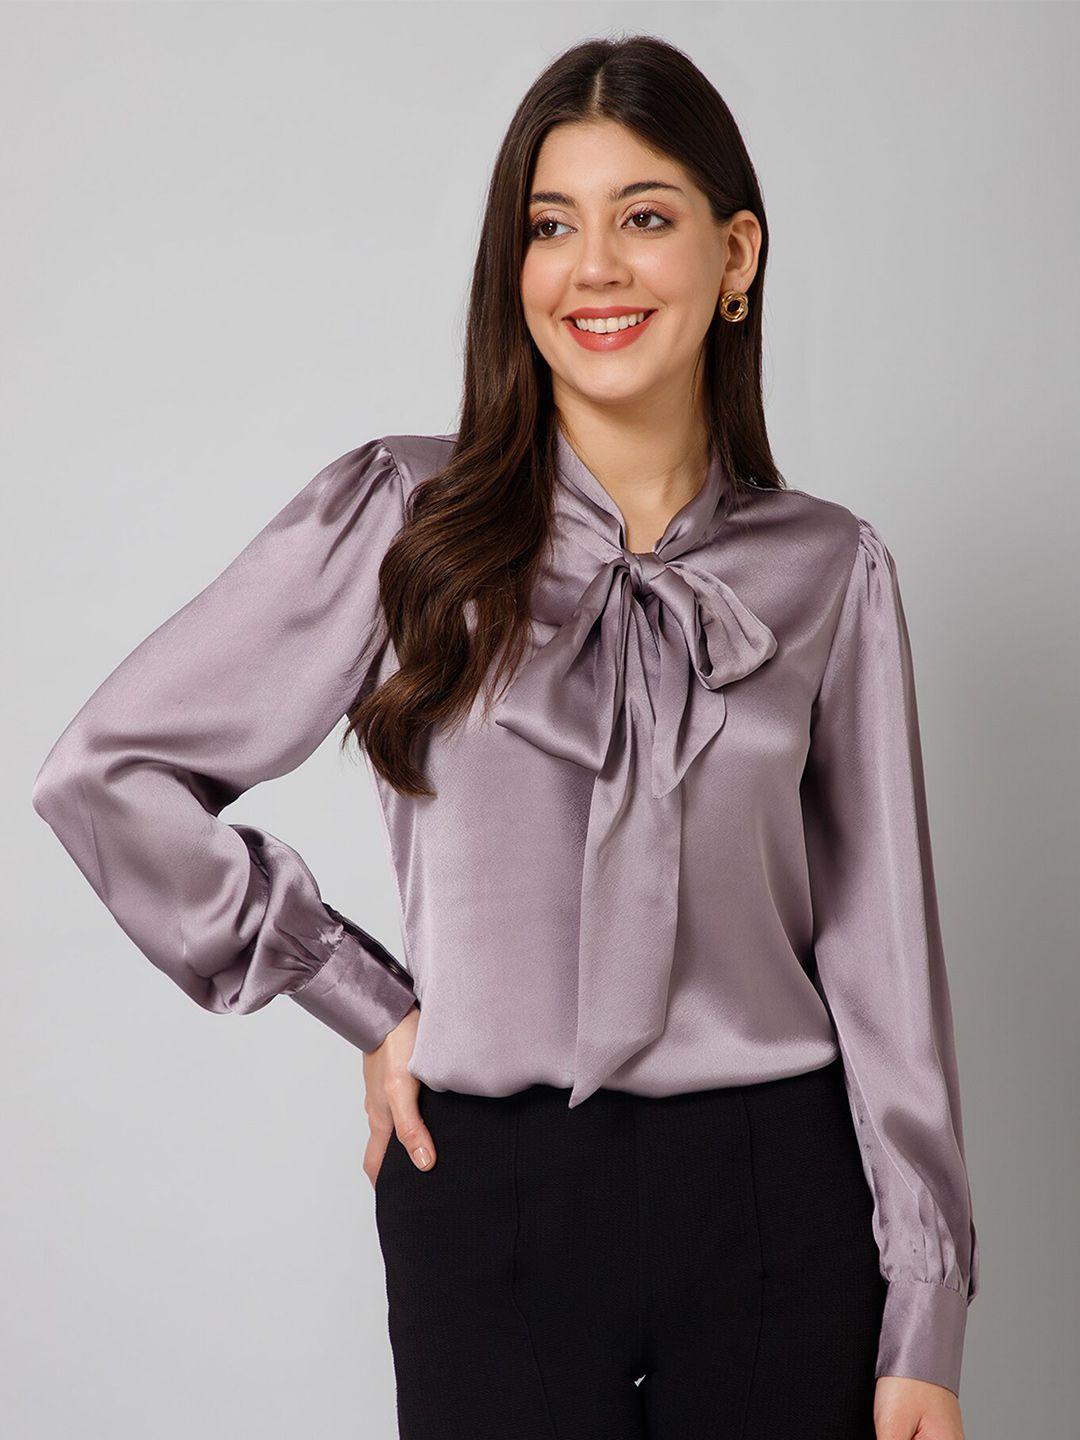 purys tie-up neck cuffed sleeves satin shirt style top